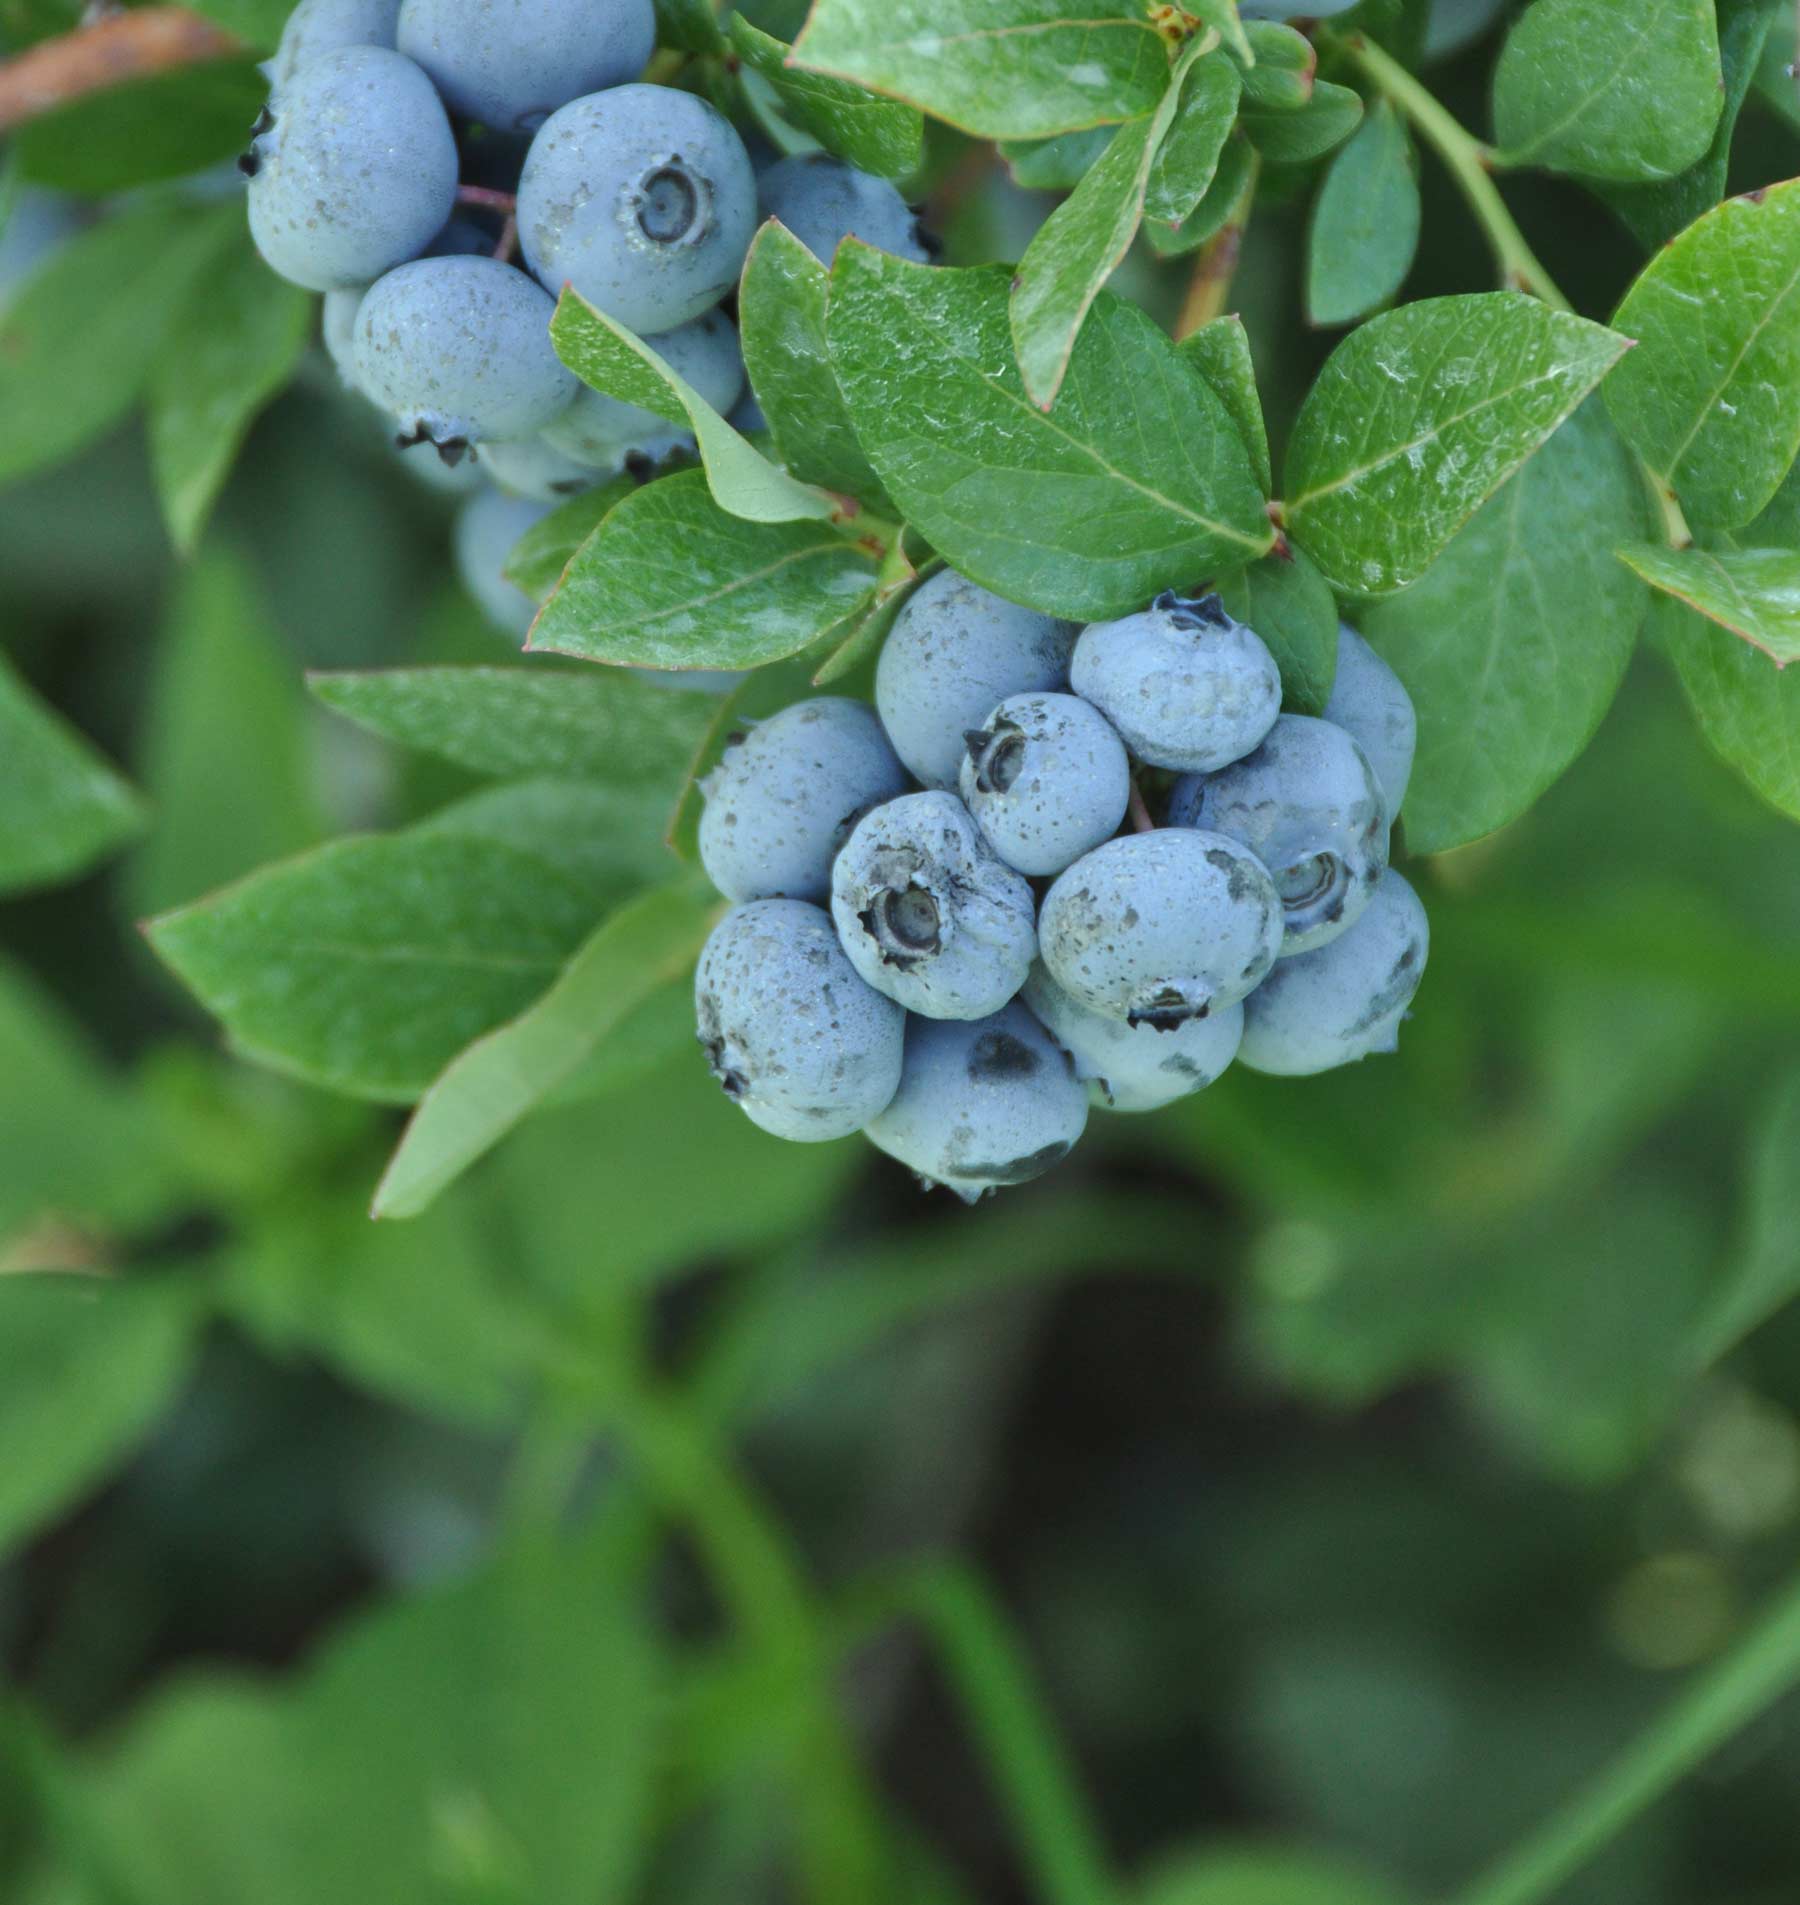 closeup view of blueberry clusters on green blueberry bush